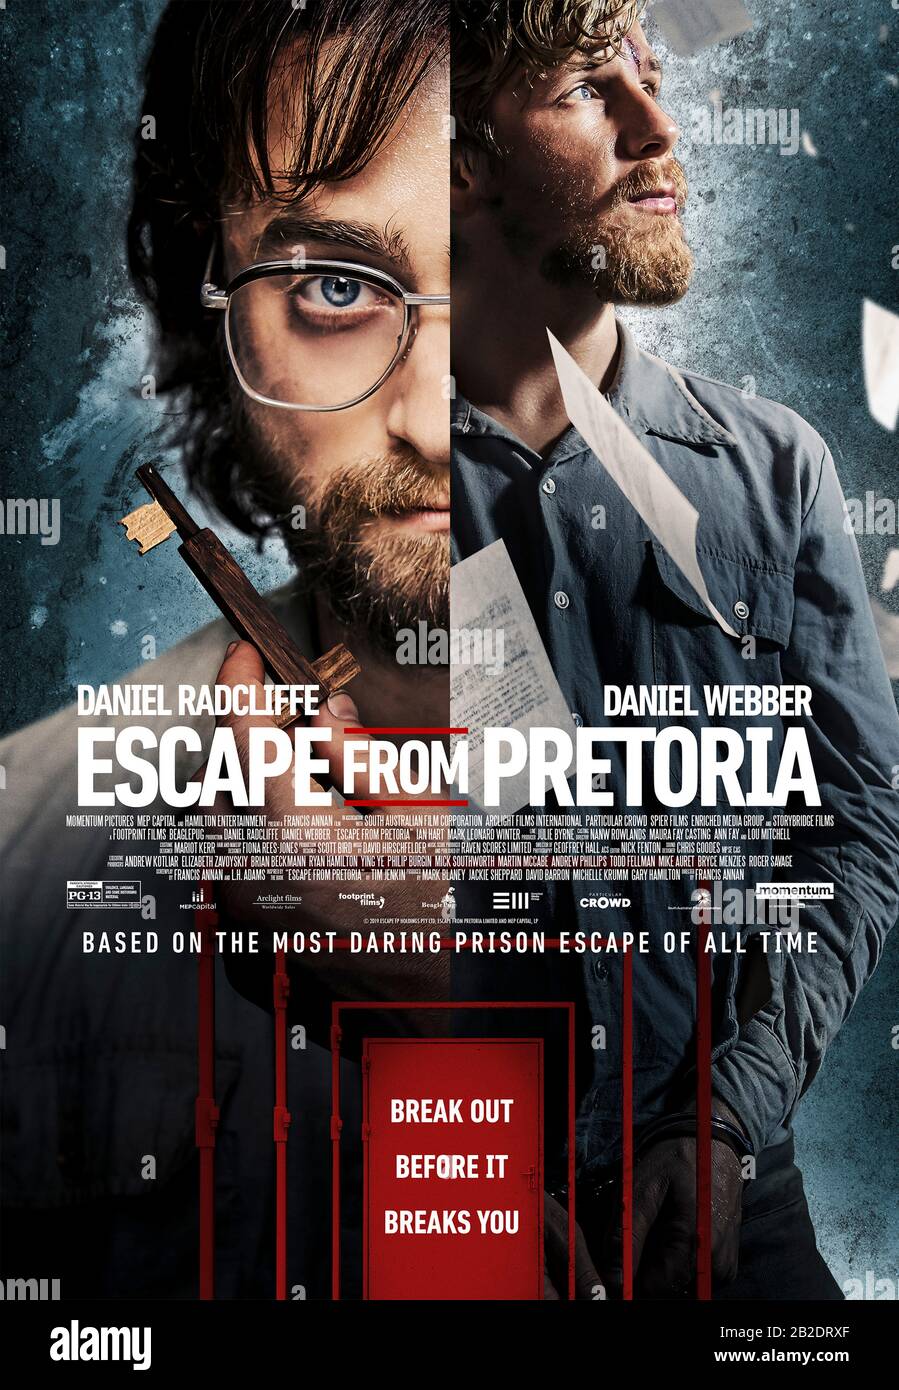 Escape from Pretoria (2020) directed by Francis Annan and starring Daniel Radcliffe, Ian Hart, Daniel Webber and Nathan Page. Based on the true story about 3 political prisoners who escape prison in South Africa in 1979. Stock Photo